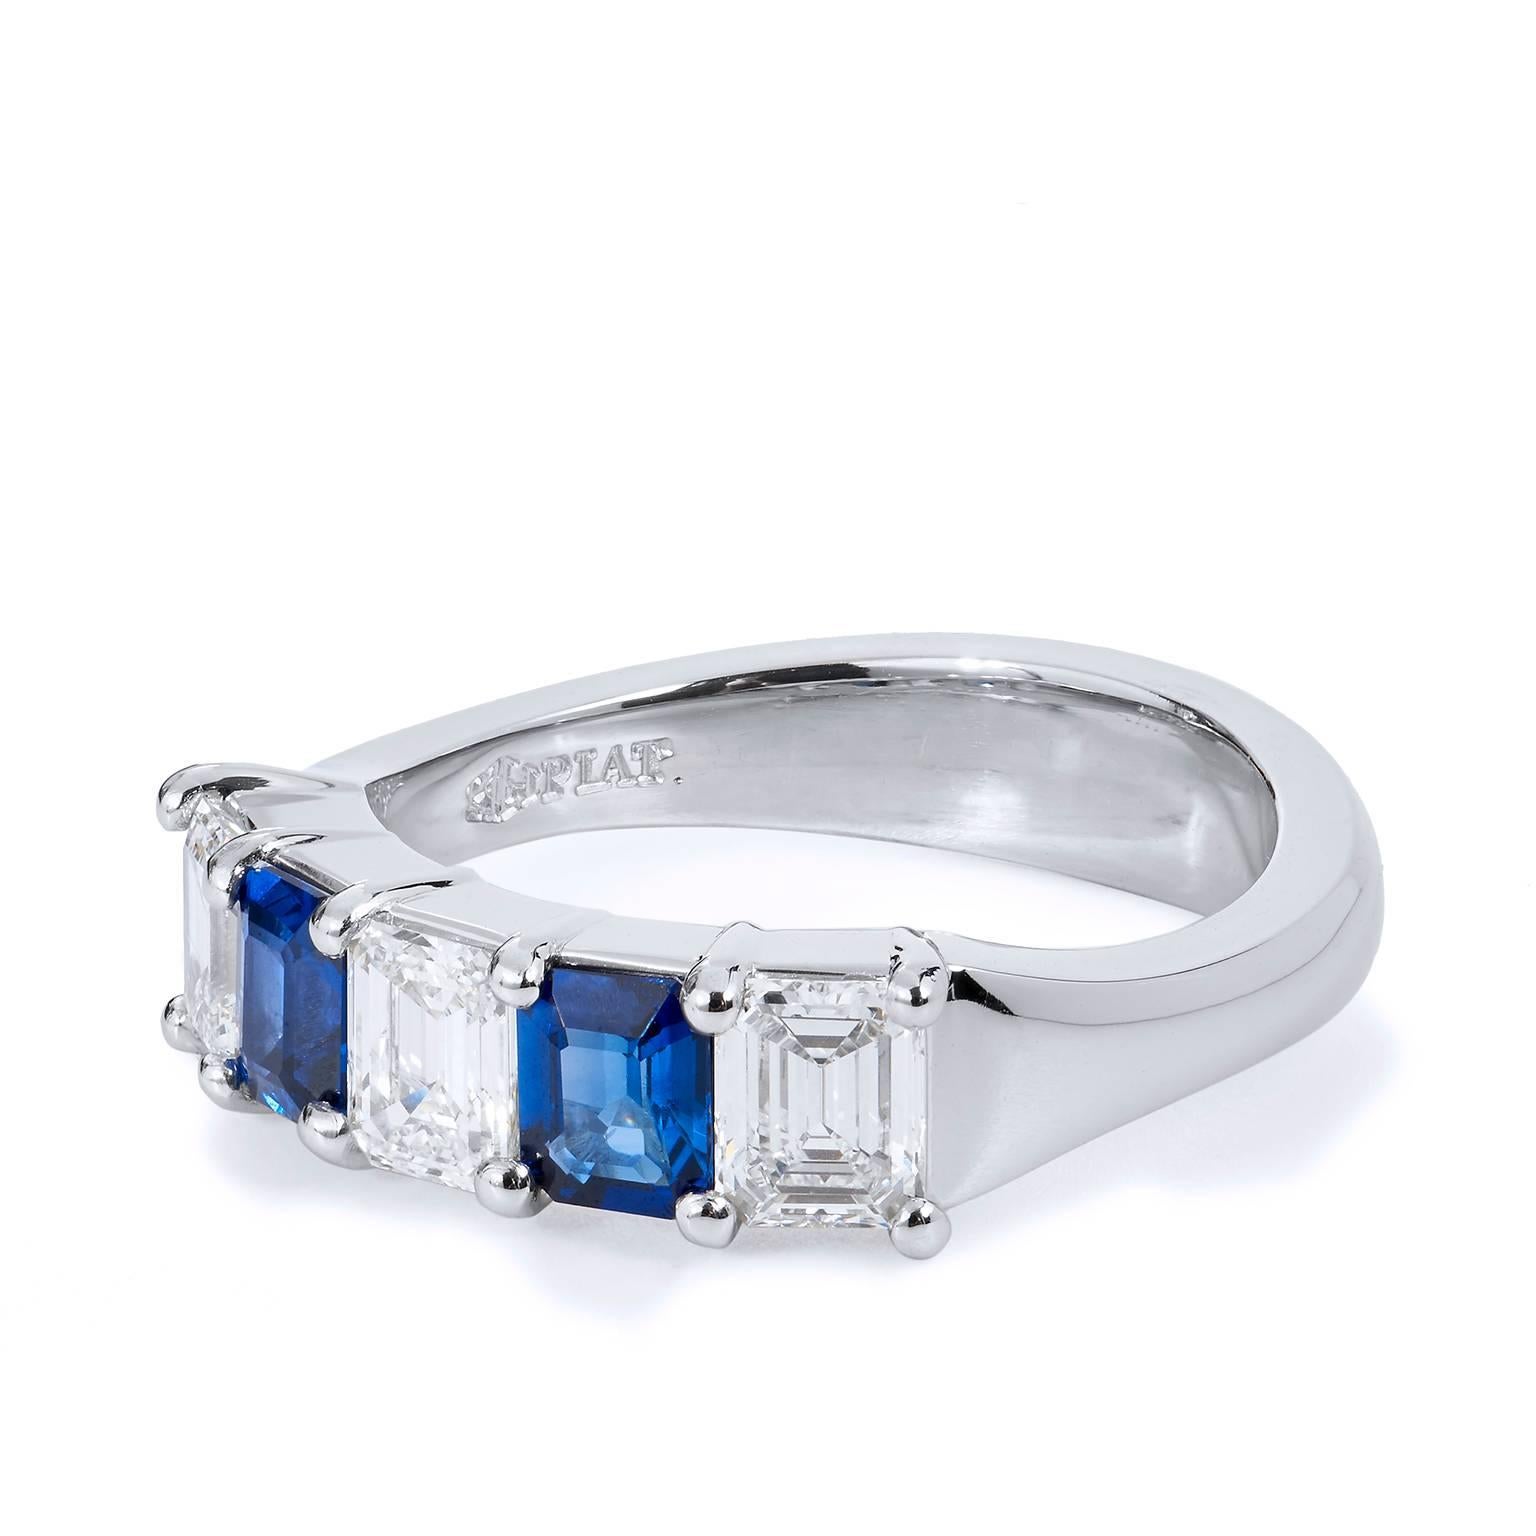  GIA Certified 1.32 Carat Diamond .96 Carats Blue Sapphires Platinum Band Ring 

This band integrates these two highly desired gemstones into one piece with the finest of sapphires and diamonds set in platinum.  
This ring features 1.32 carats of